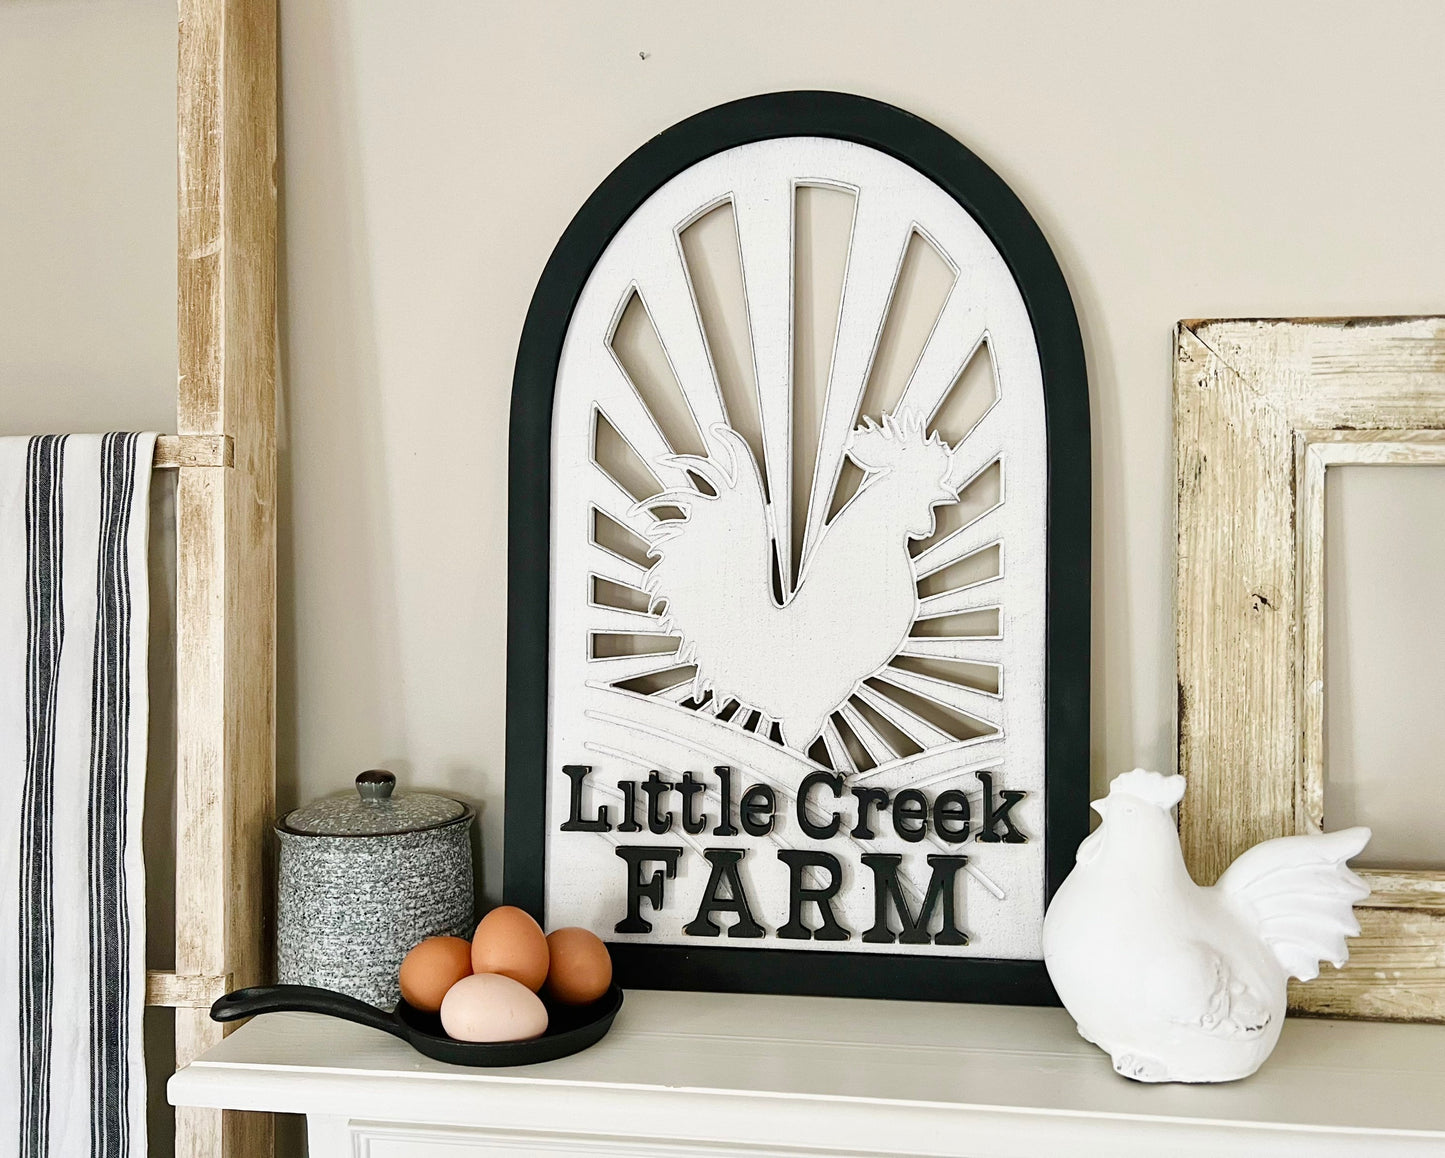 Personalized farm or homestead sign with your name